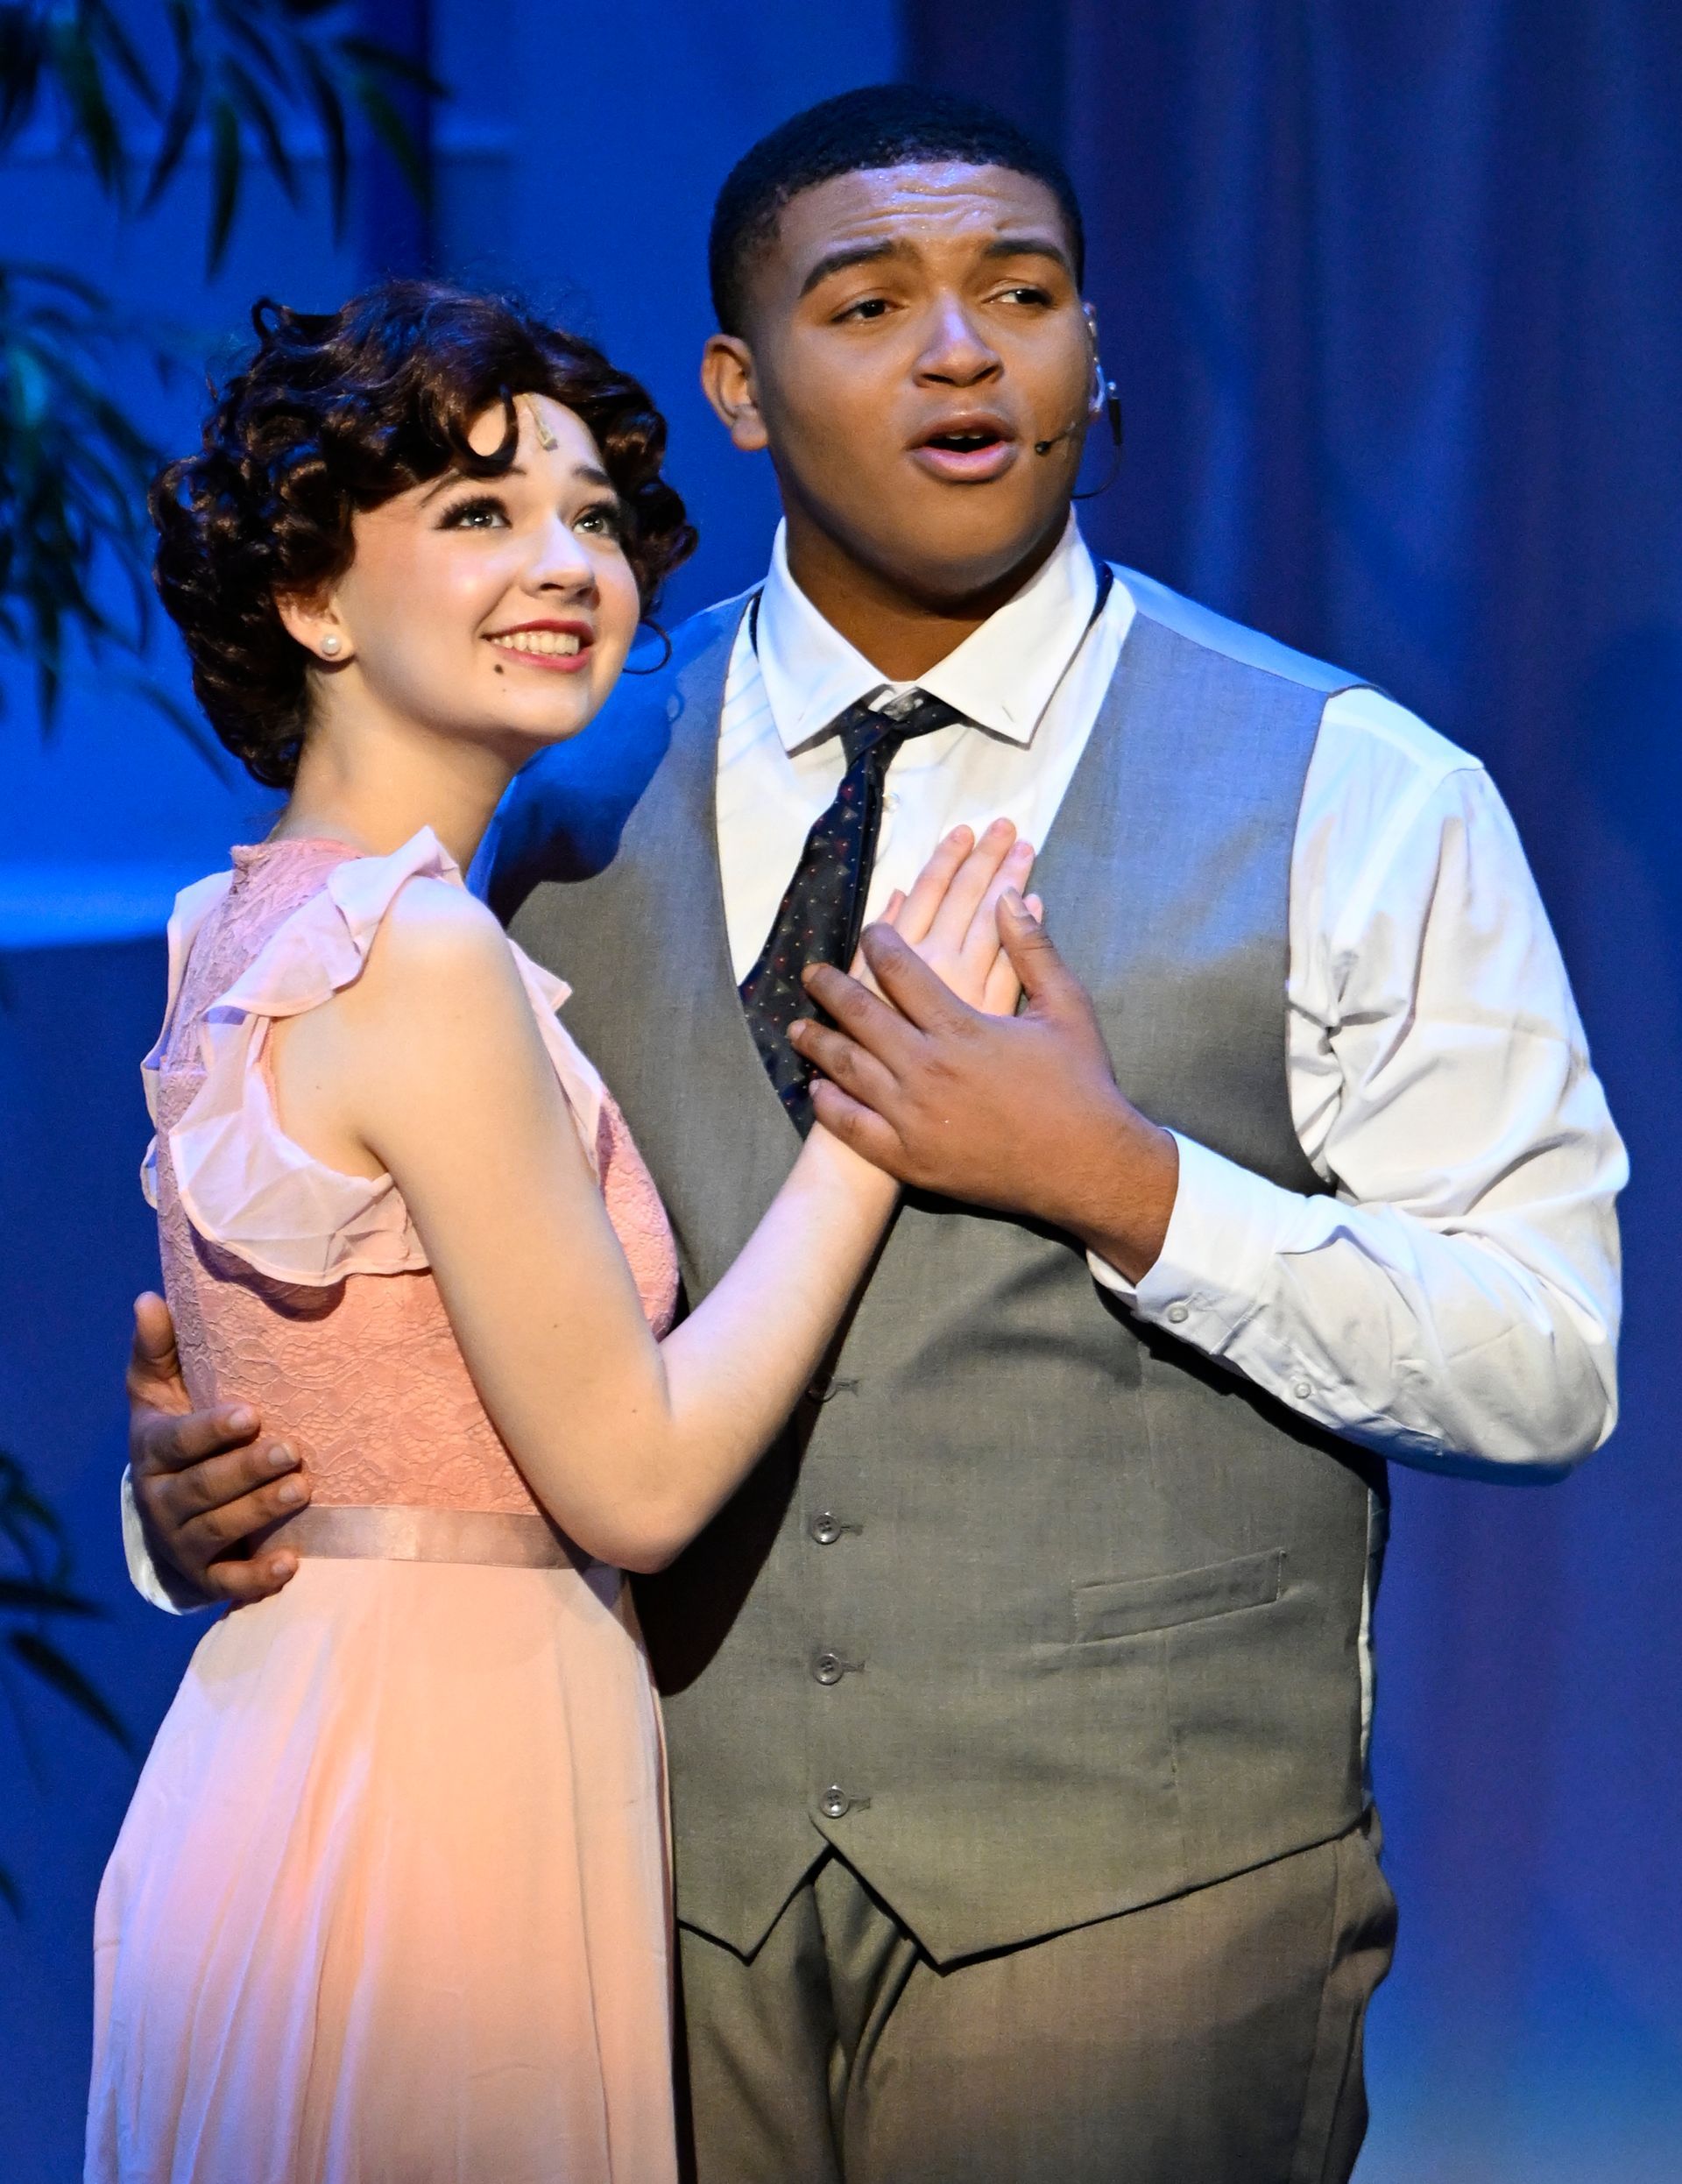 a man and a woman are standing next to each other on a stage .